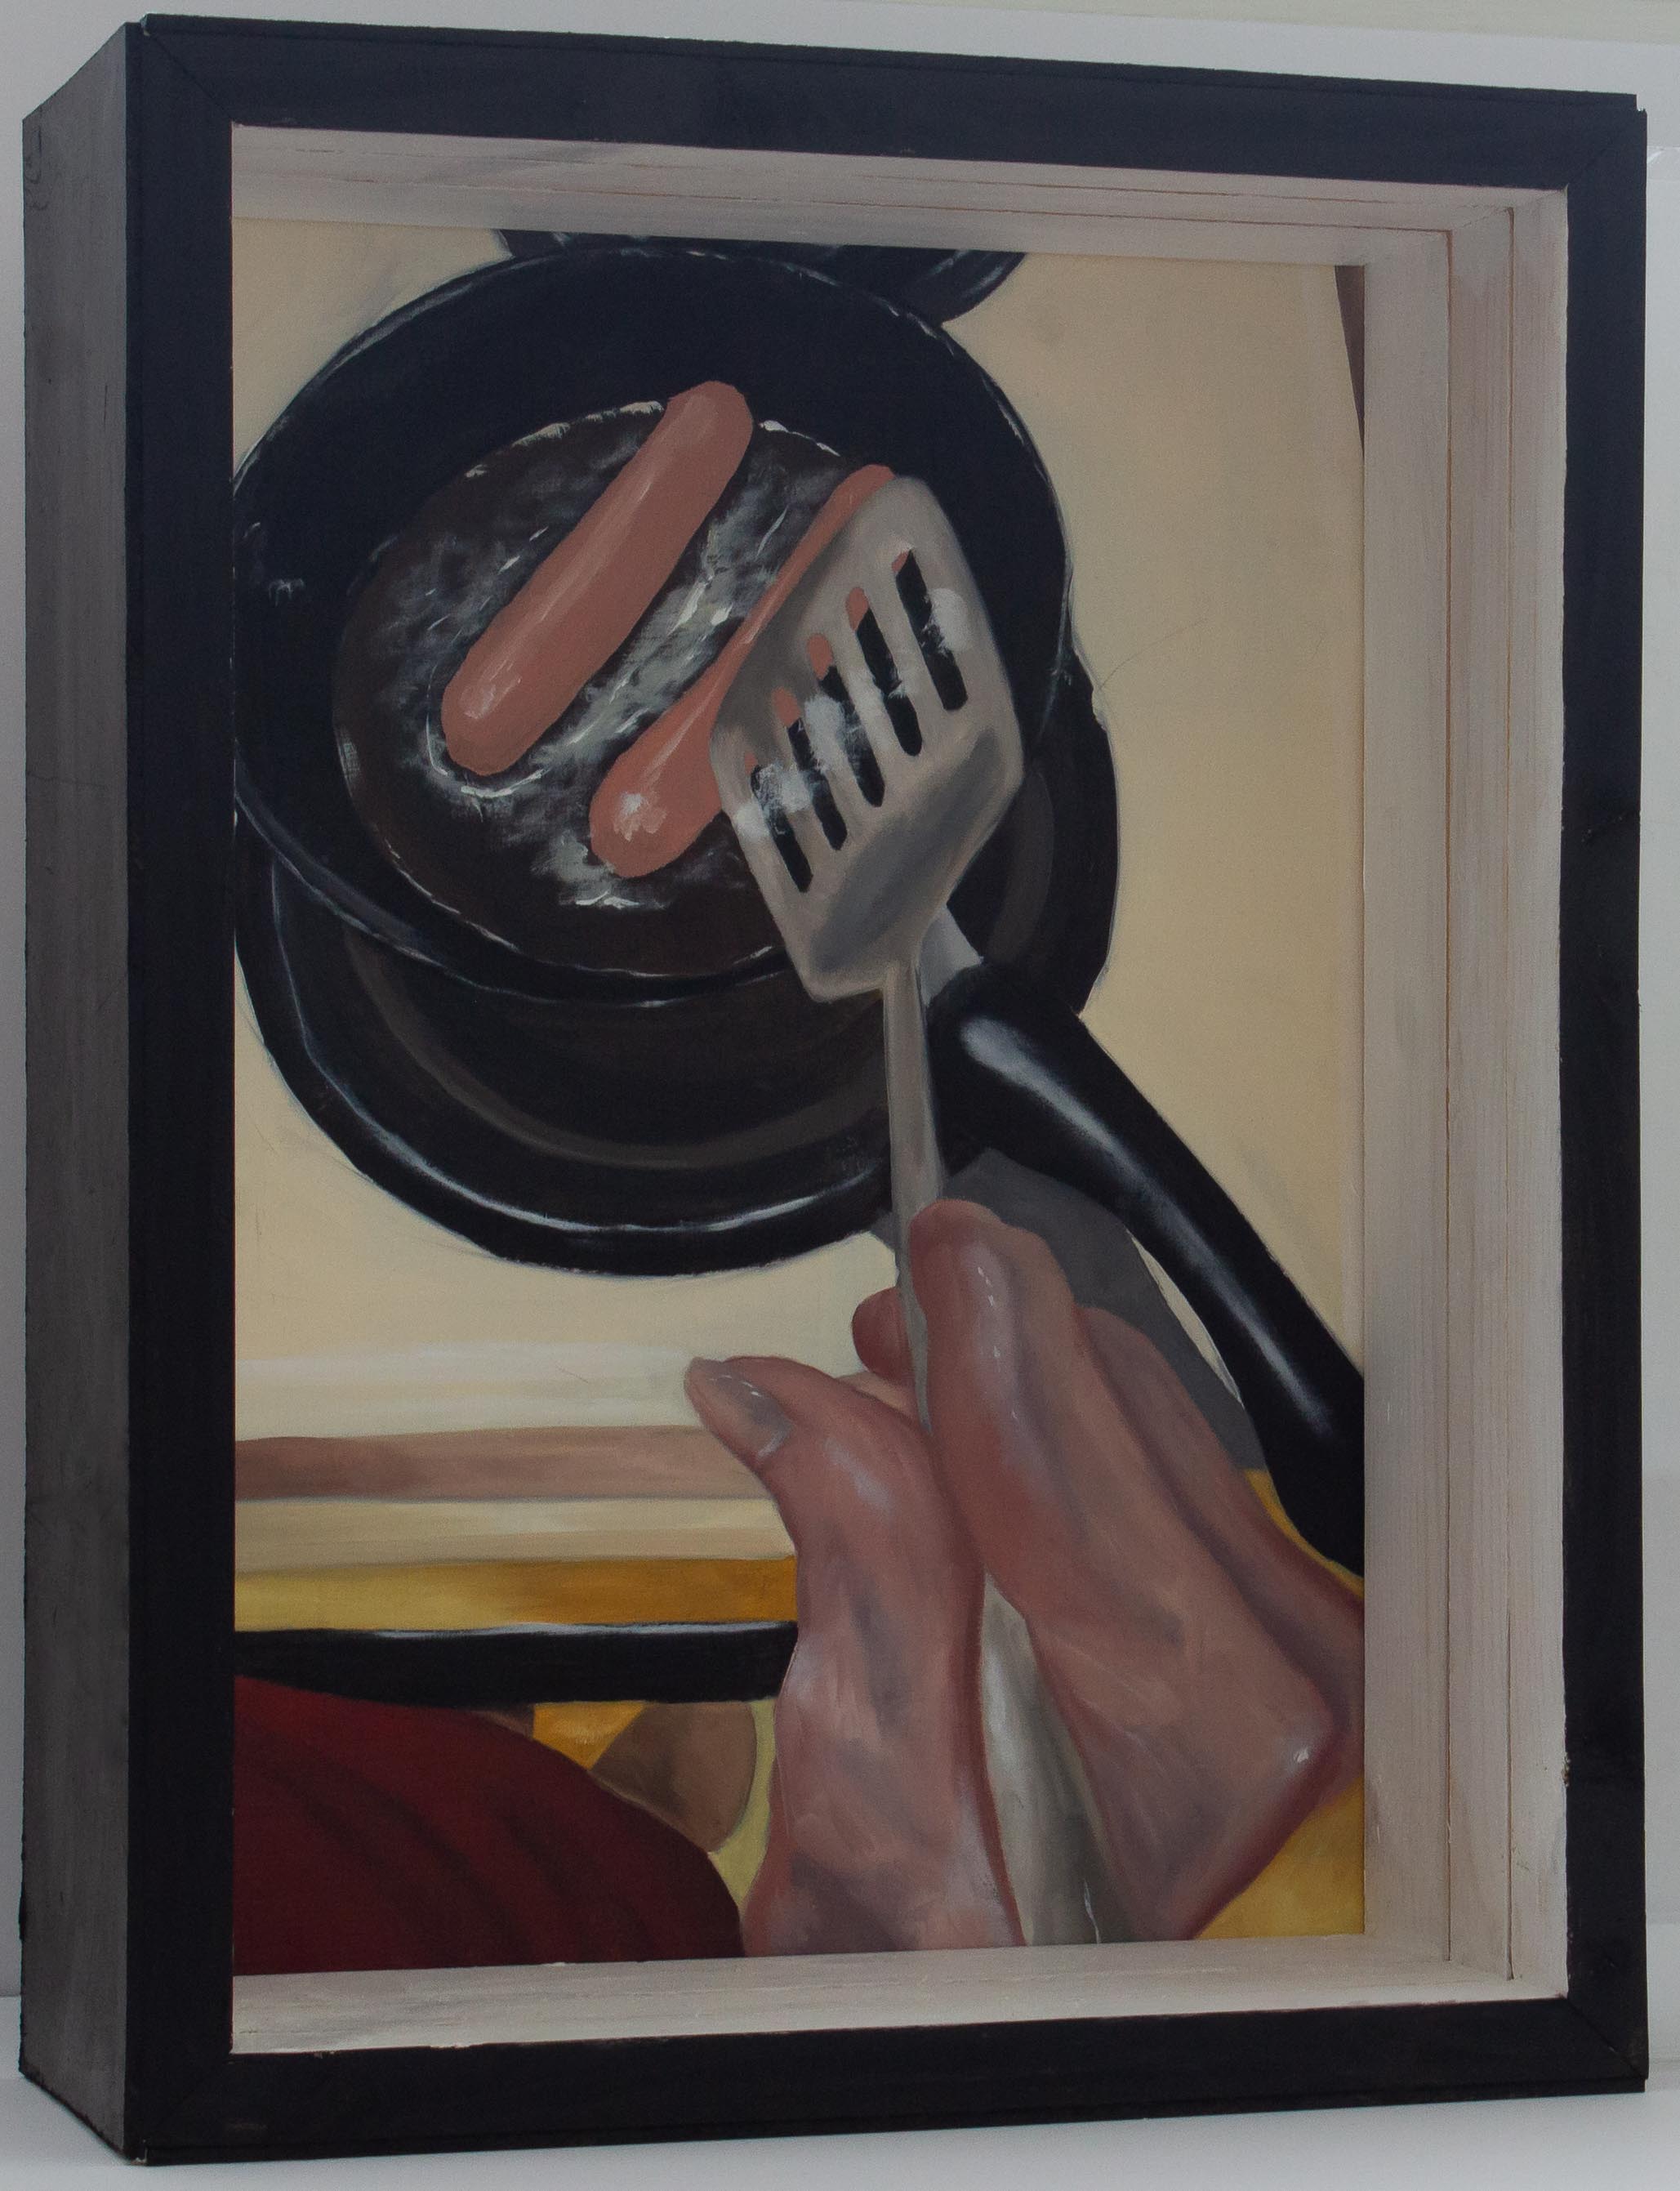 A box with a painting in the back and treated plexiglass panels interfering with the view of the painting. The painting shows an older person’s hand as they cook two hotdogs on a skillet. The person is holding a spatula. They are wearing a red shirt. The stove top surrounding the eye being used is visible. Both panels are slid out of the box. The painting is no longer obstructed by the plexiglass. The hand in the foreground is wrinkly and the fingers are crooked due to arthritis. The painting has an overall warm color pallet.